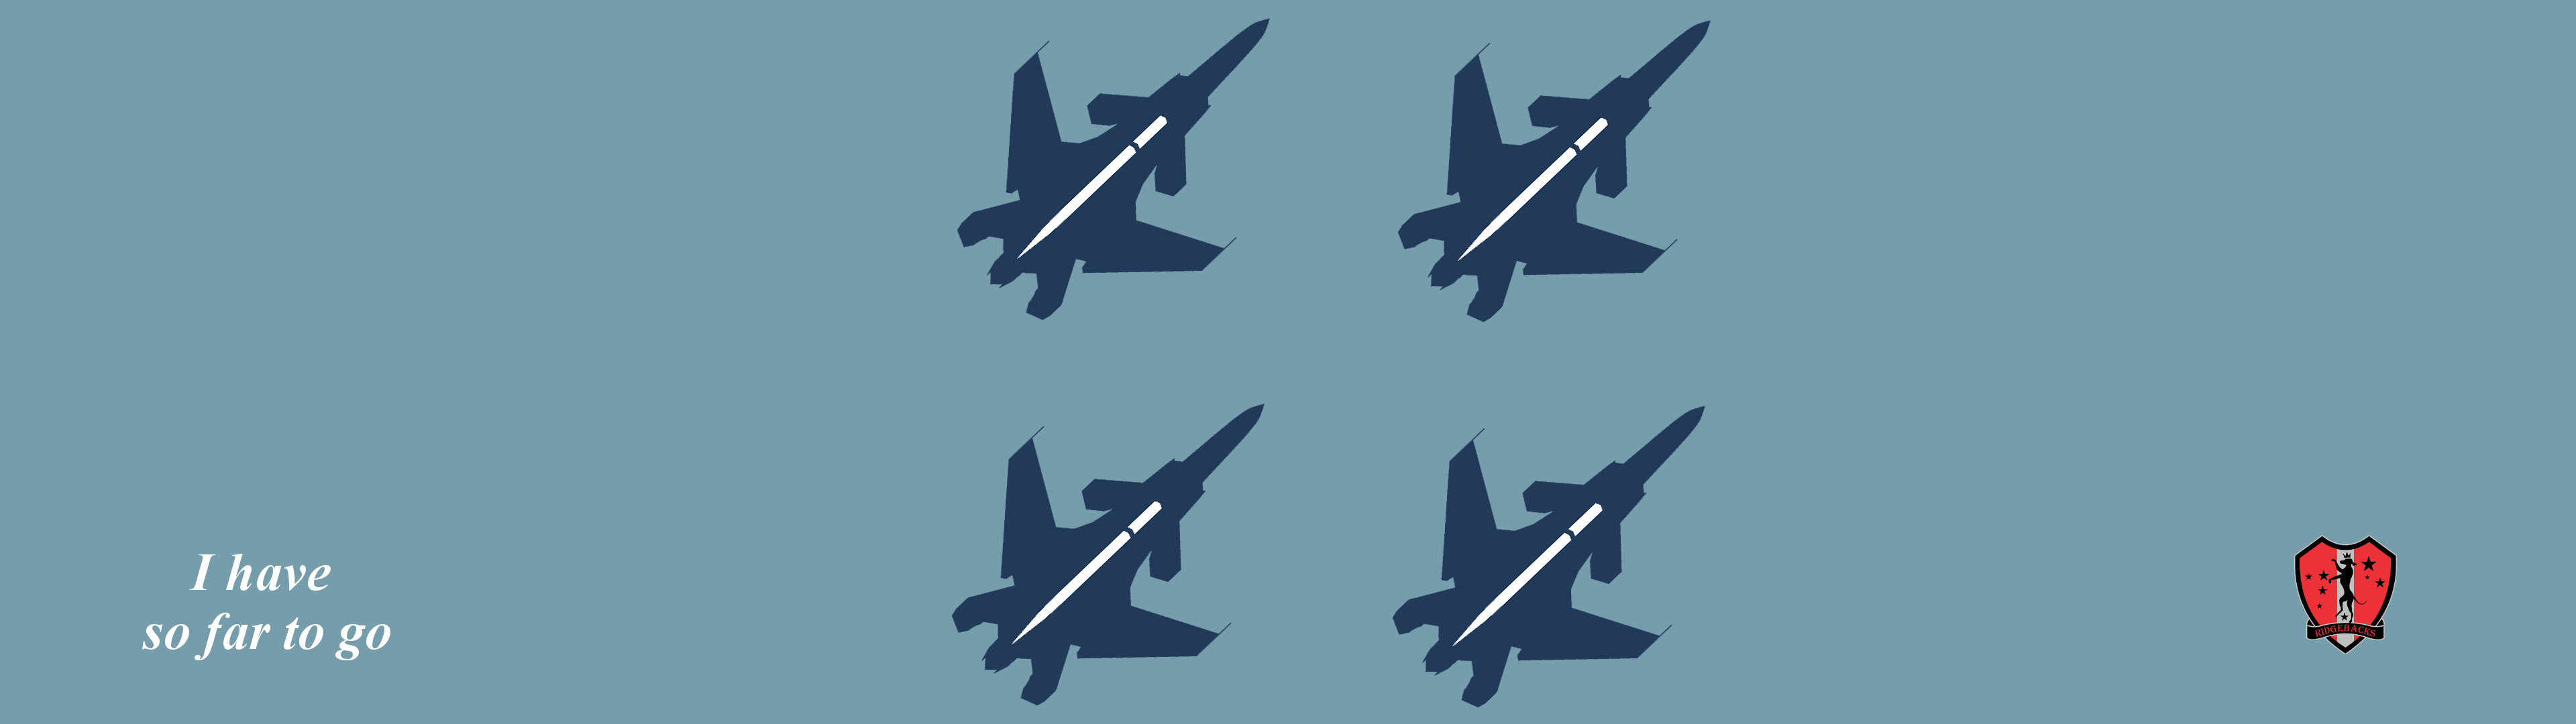 3840x1080 Inspired by this thread, I made an ACI related wallpaper with the same  minimalism style because I like a certain plane too much.